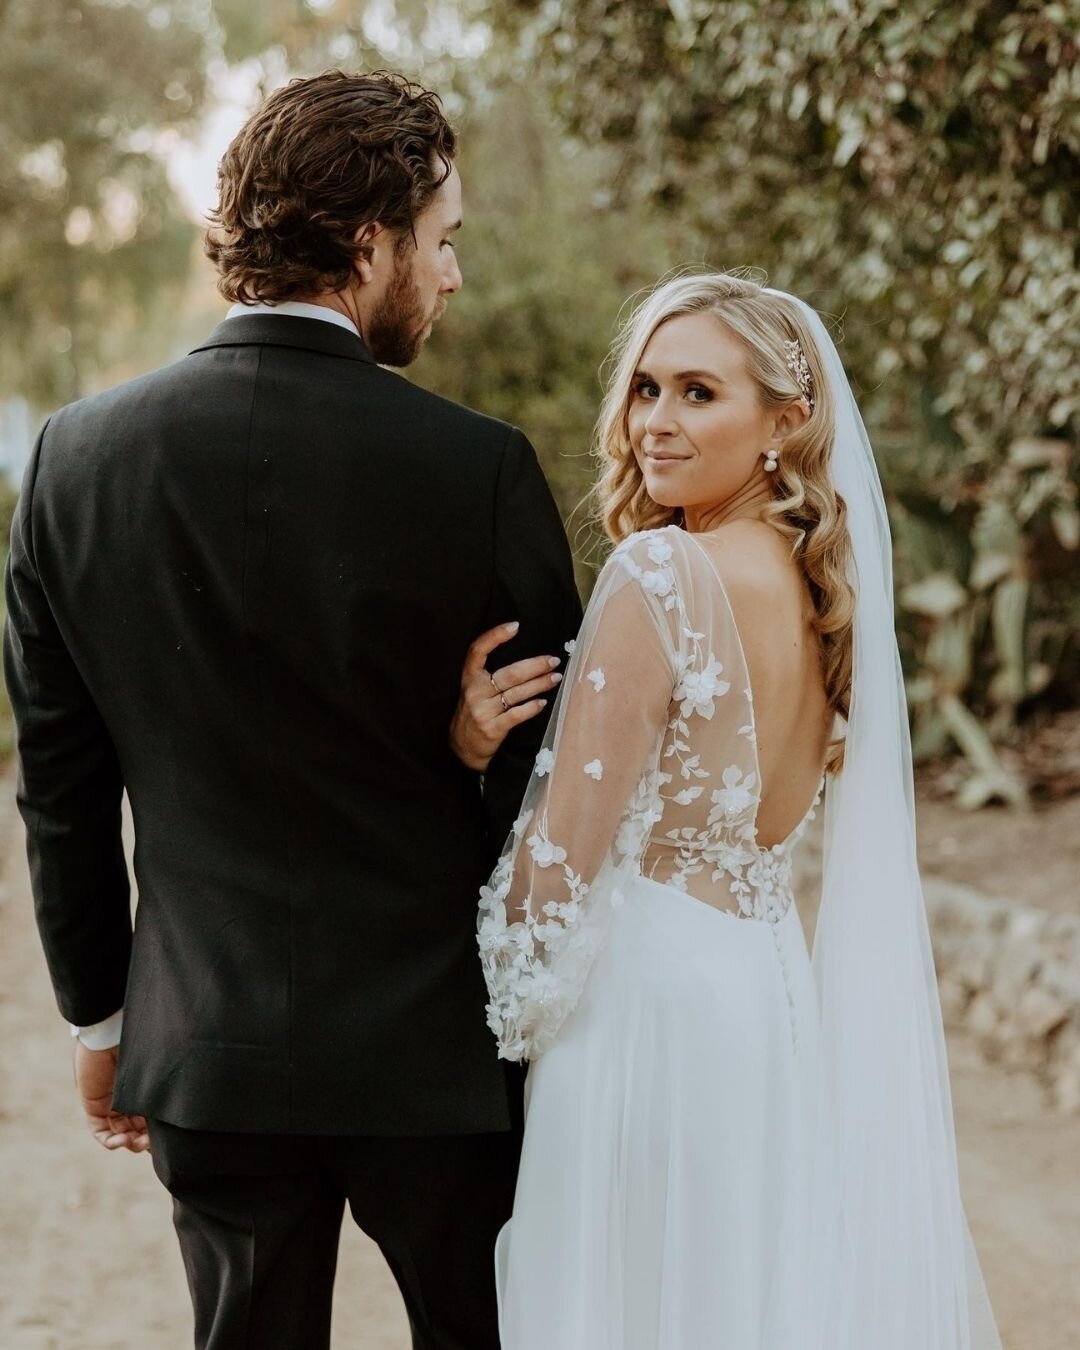 You're unique, your dress should be too. ⁠
⁠
We love how our bride Danielle looks in these floral applique sleeves by Rime Arodaky.⁠ The entire look is a dream. 💫⁠
⁠
Schedule your appointment at one of our Dress Theory locations to find the dress th